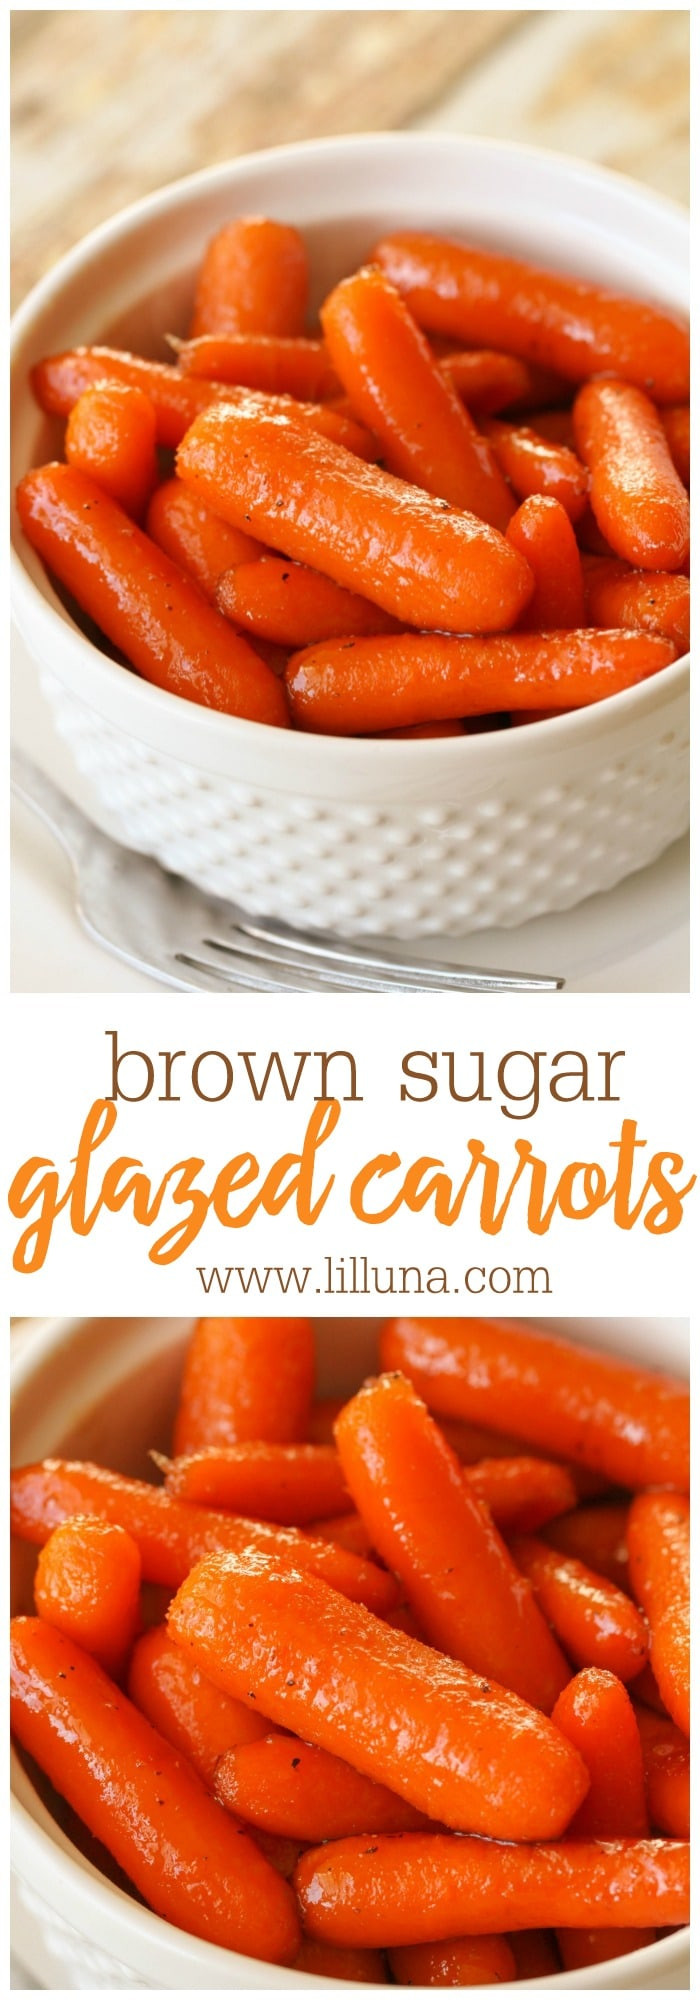 Recipes Baby Carrots
 Brown Sugar Glazed Carrots Recipe the Perfect Side Dish